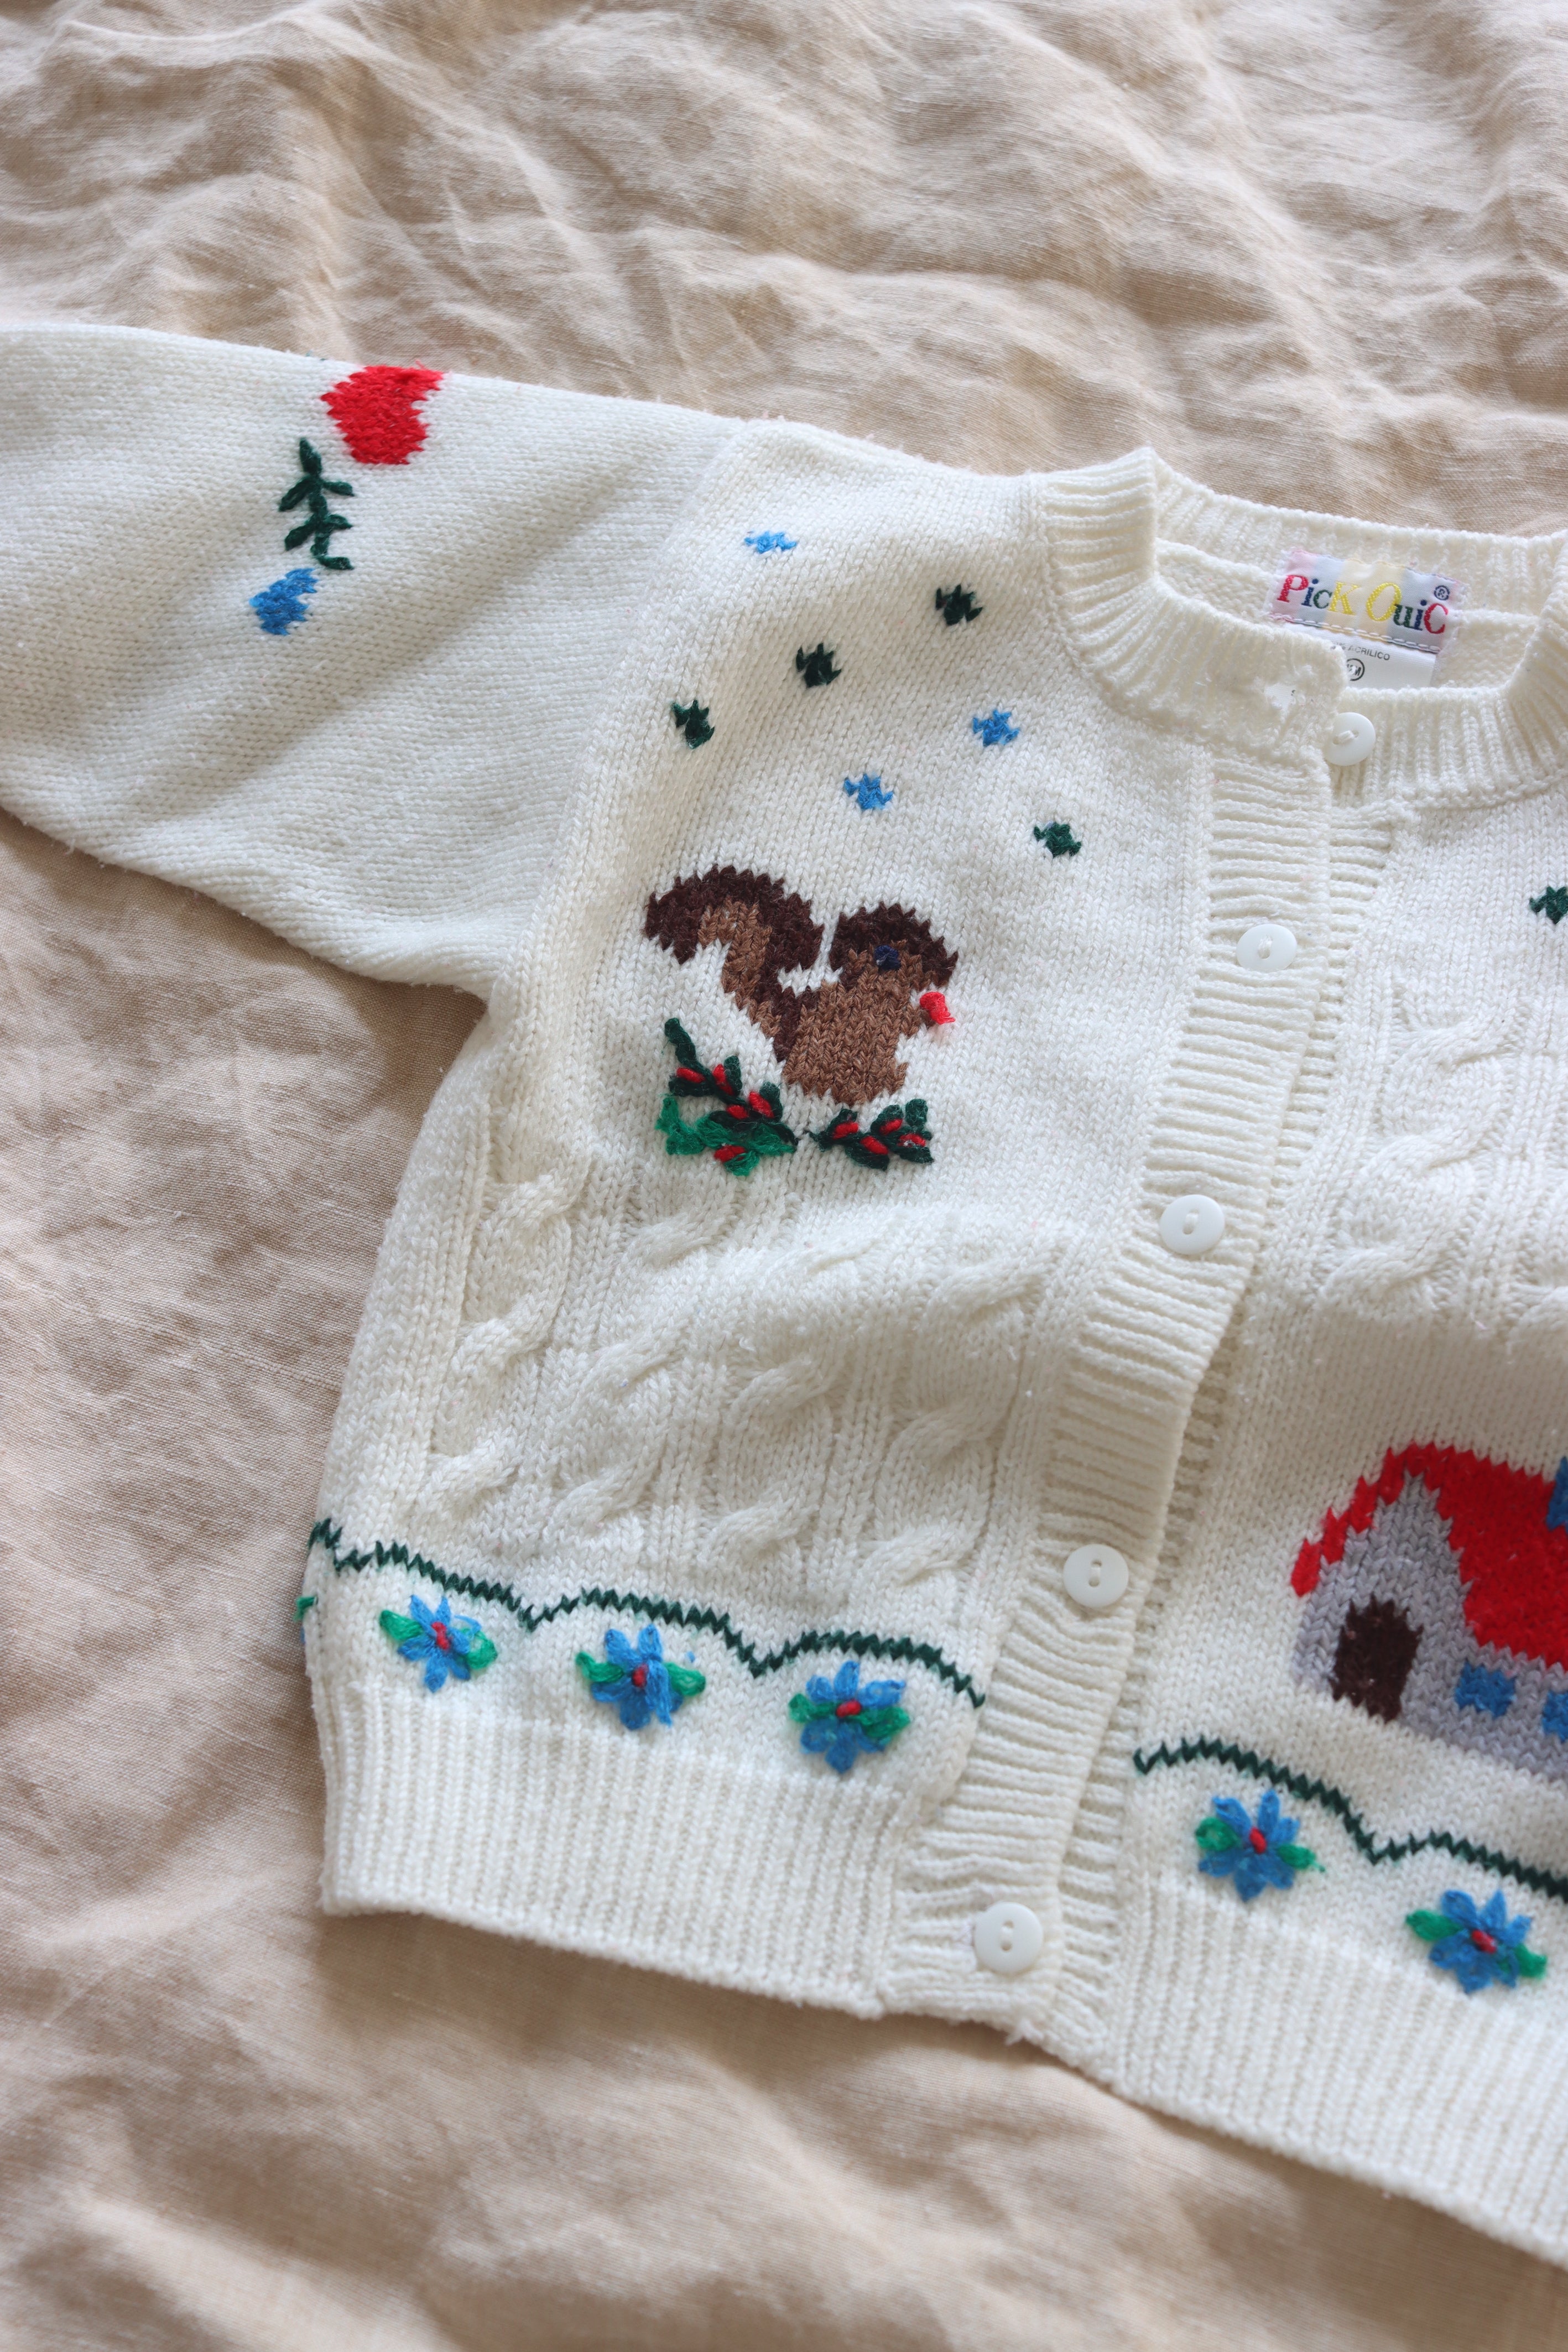 Vintage French knit cardigan - size 6-12 months